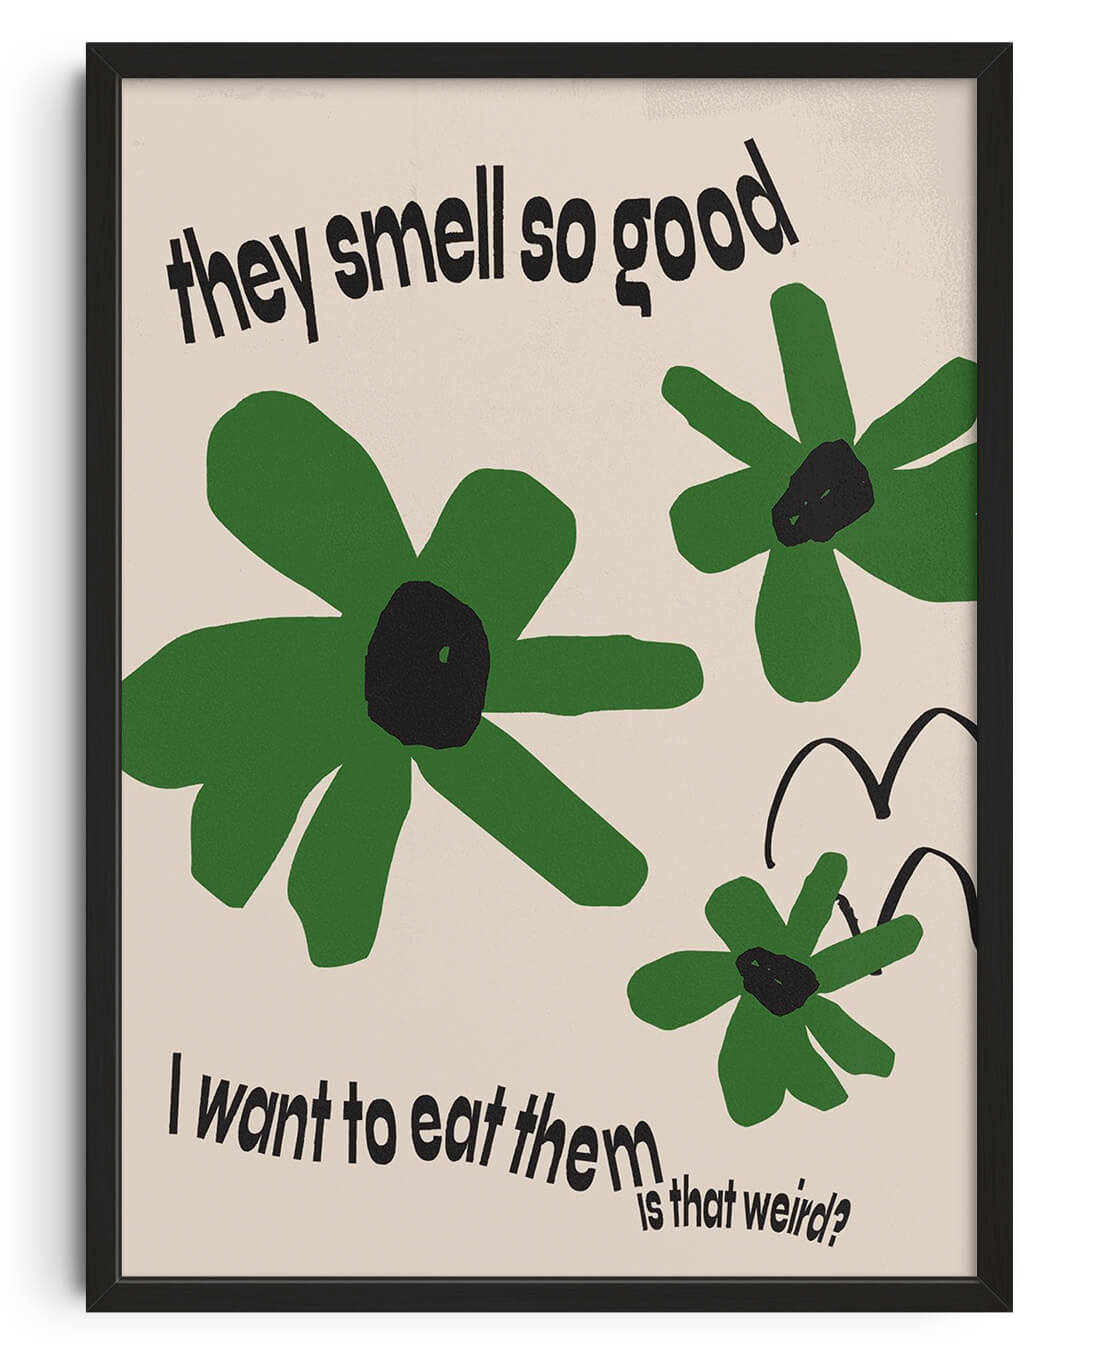 11.7x16.5" (A3) They smell so good - UNFRAMED contemporary wall art print by Lou Wang - sold by DROOL